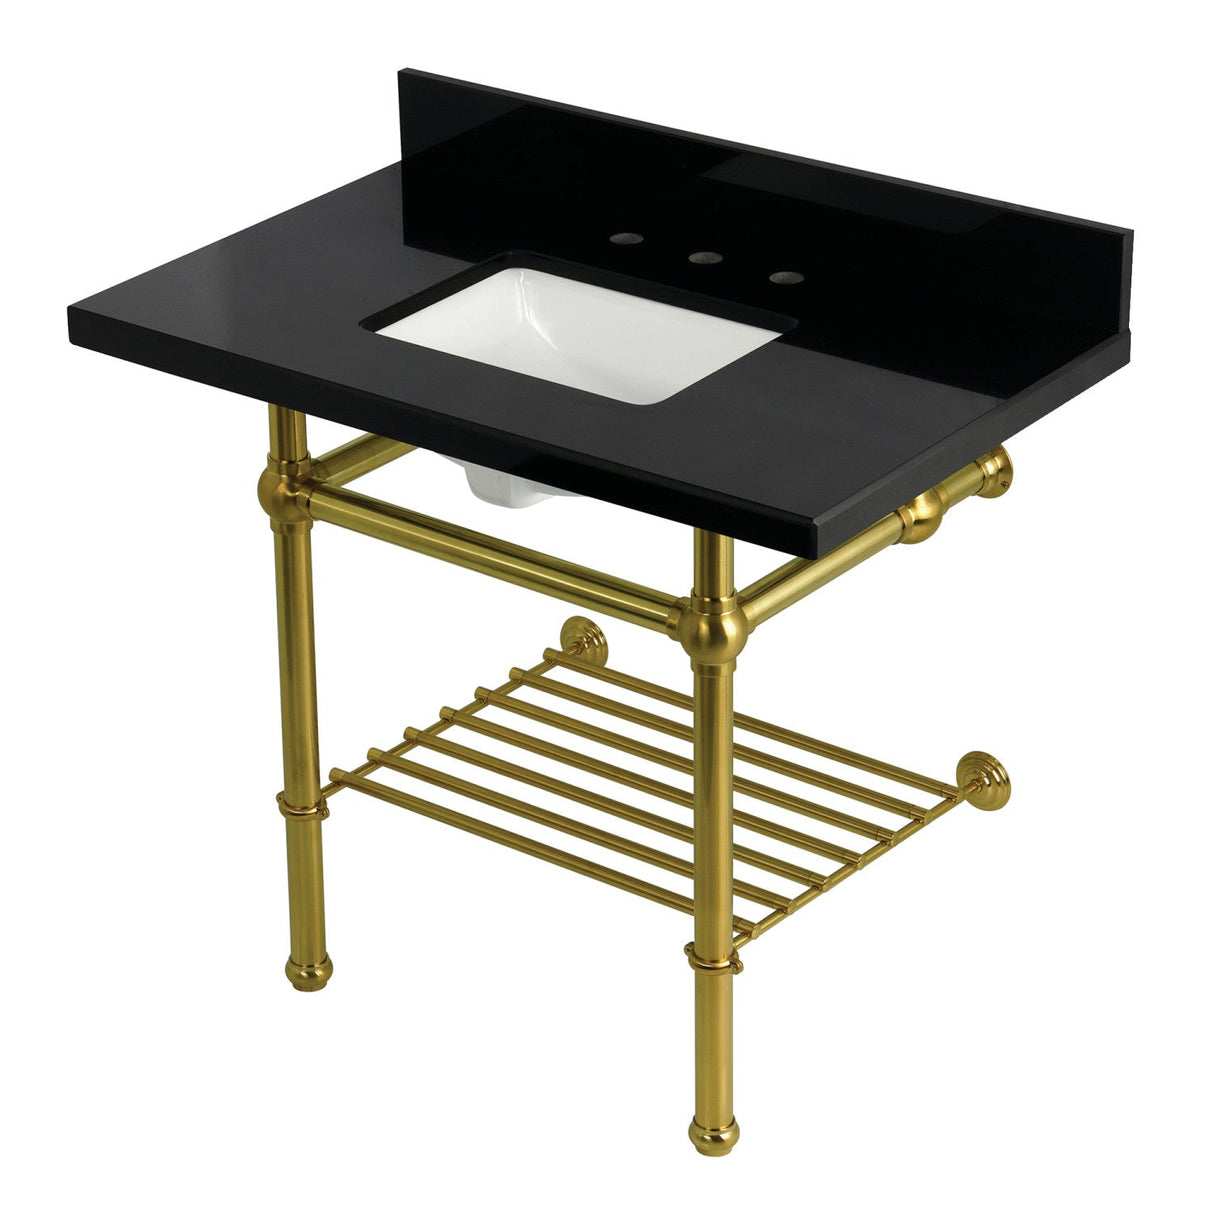 Templeton KVPK3630KBSQB7 36-Inch Console Sink with Brass Legs (8-Inch, 3 Hole), Black Granite/Brushed Brass